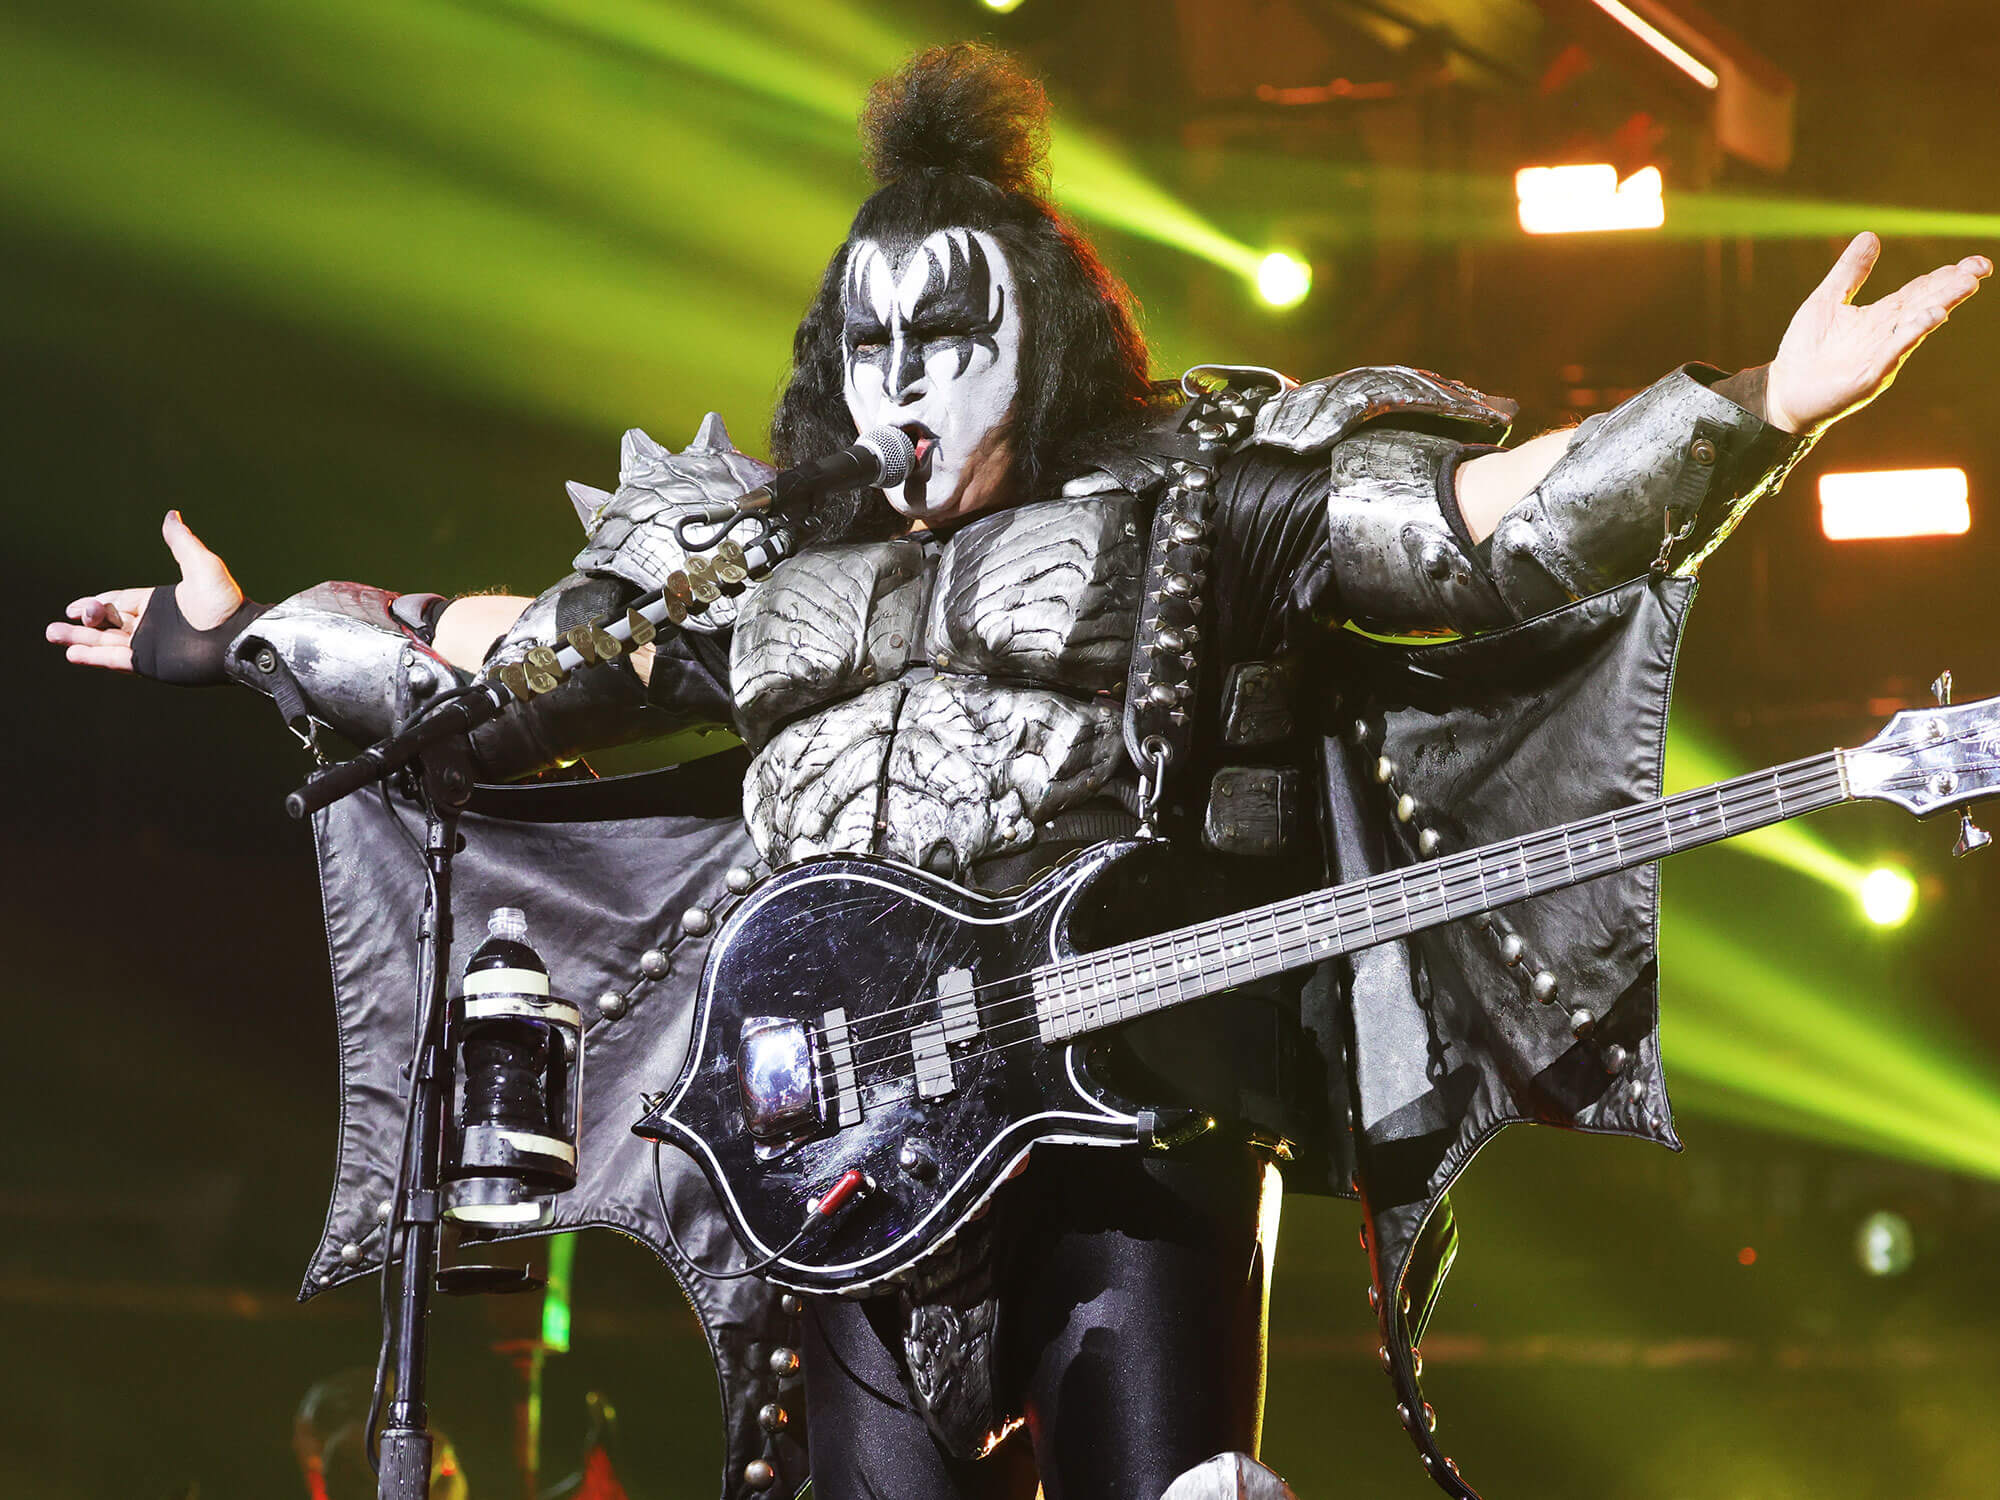 Gene Simmons performing live